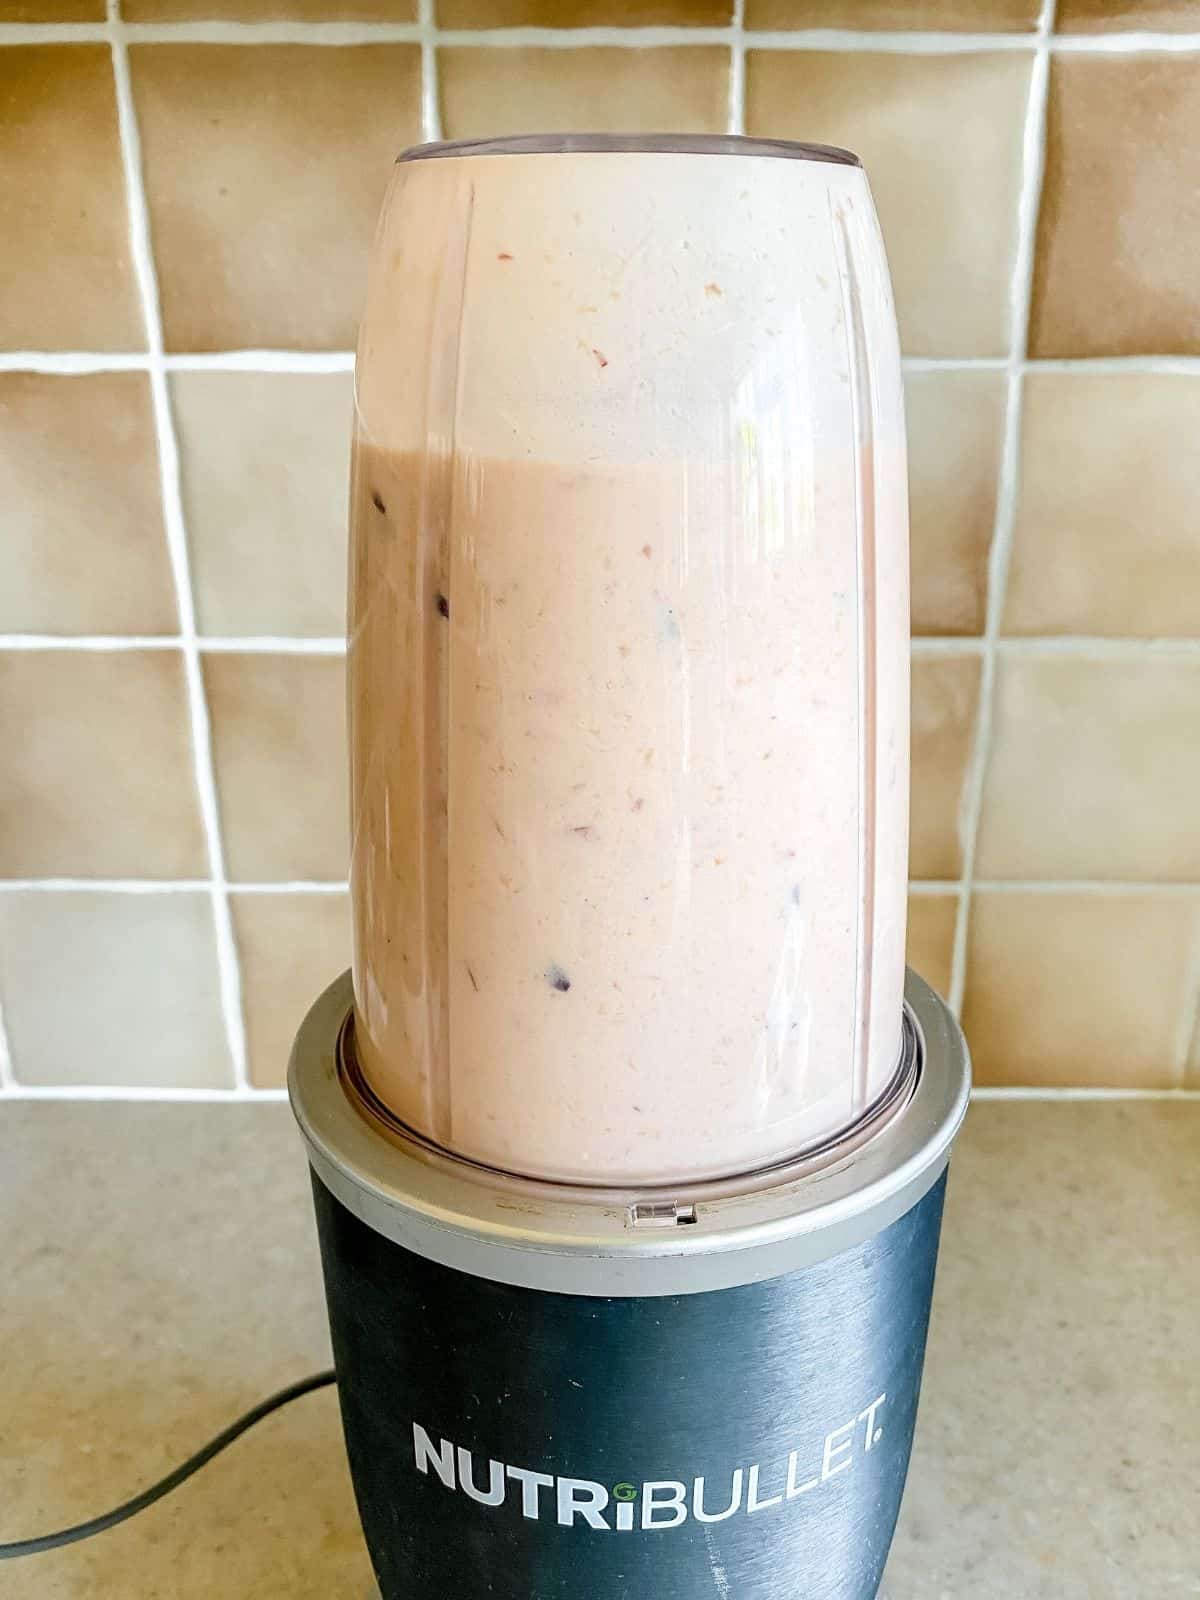 blended peaches and coconut milk in a blender.